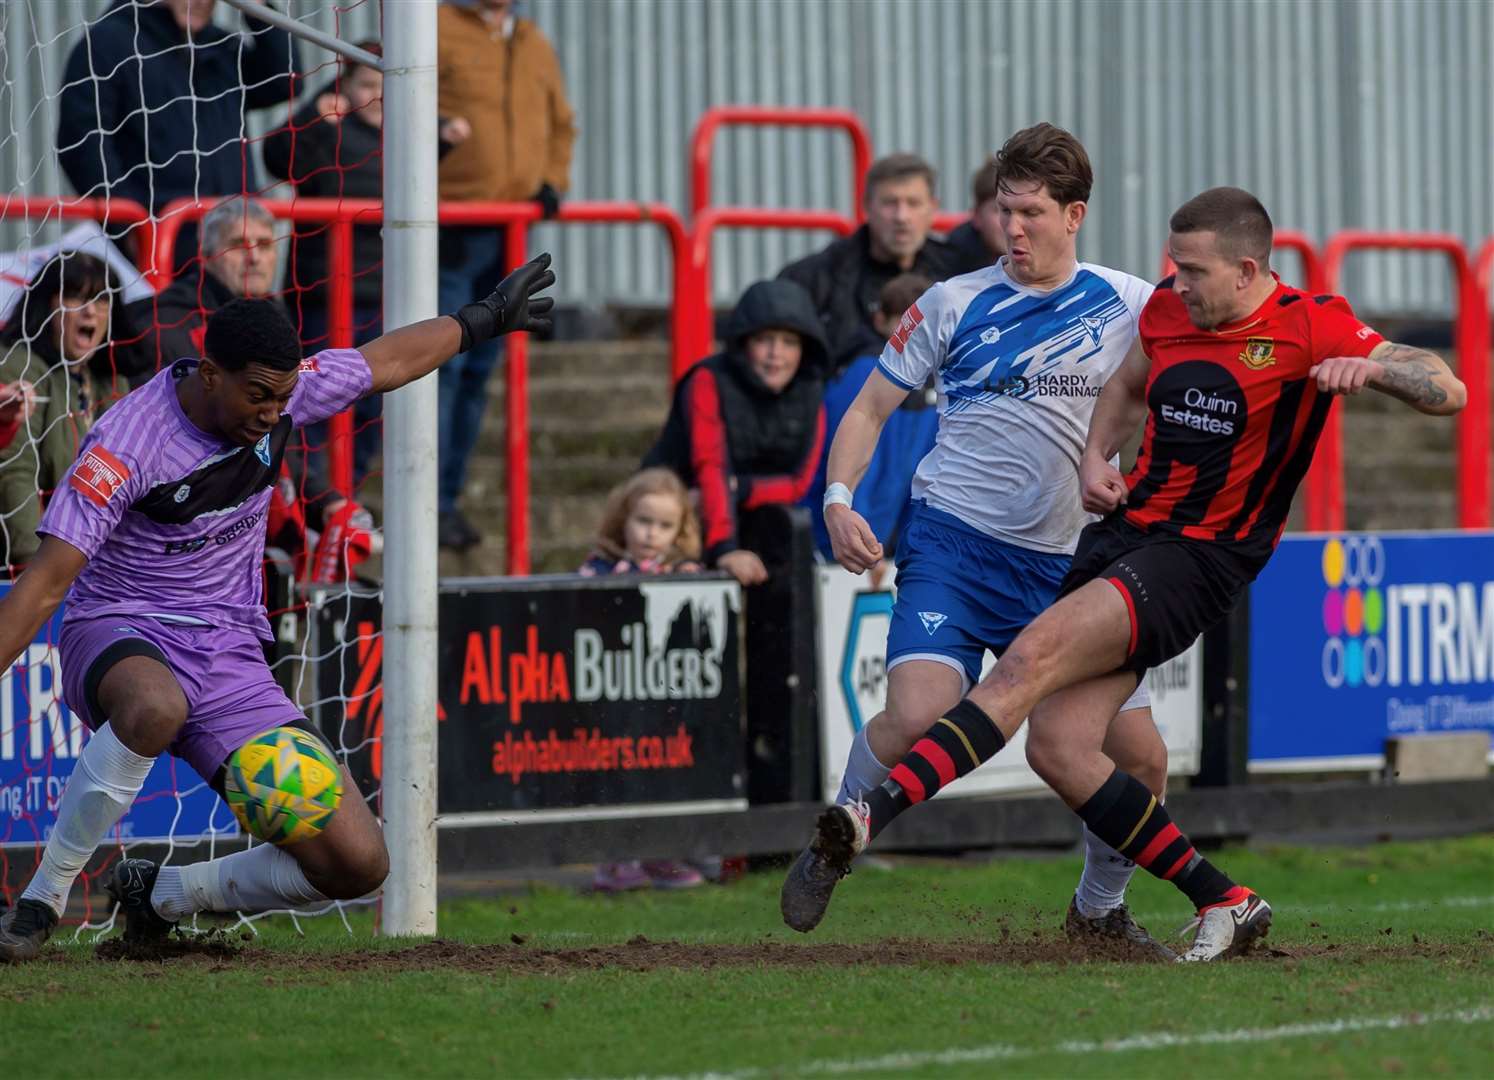 Luke Woodward gives Sittingbourne the lead at Erith & Belvedere. Picture: Ian Scammell